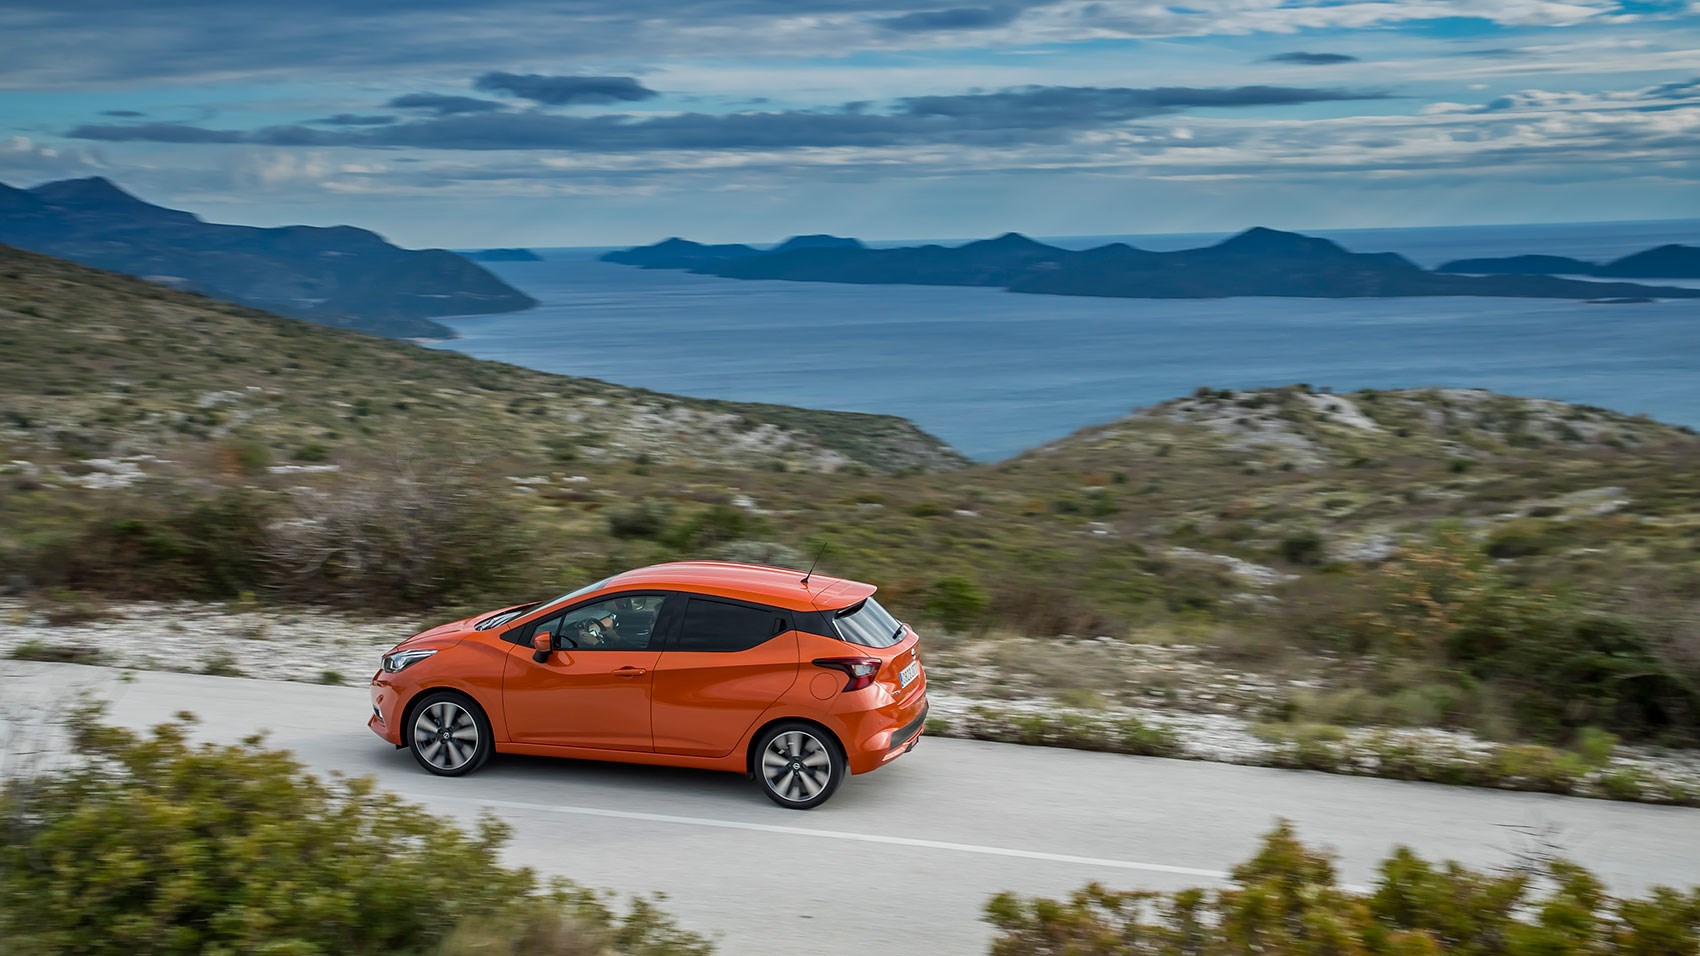 Nissan Micra review: on-trend blacked-out windows, floating roofline and hidden rear door handles